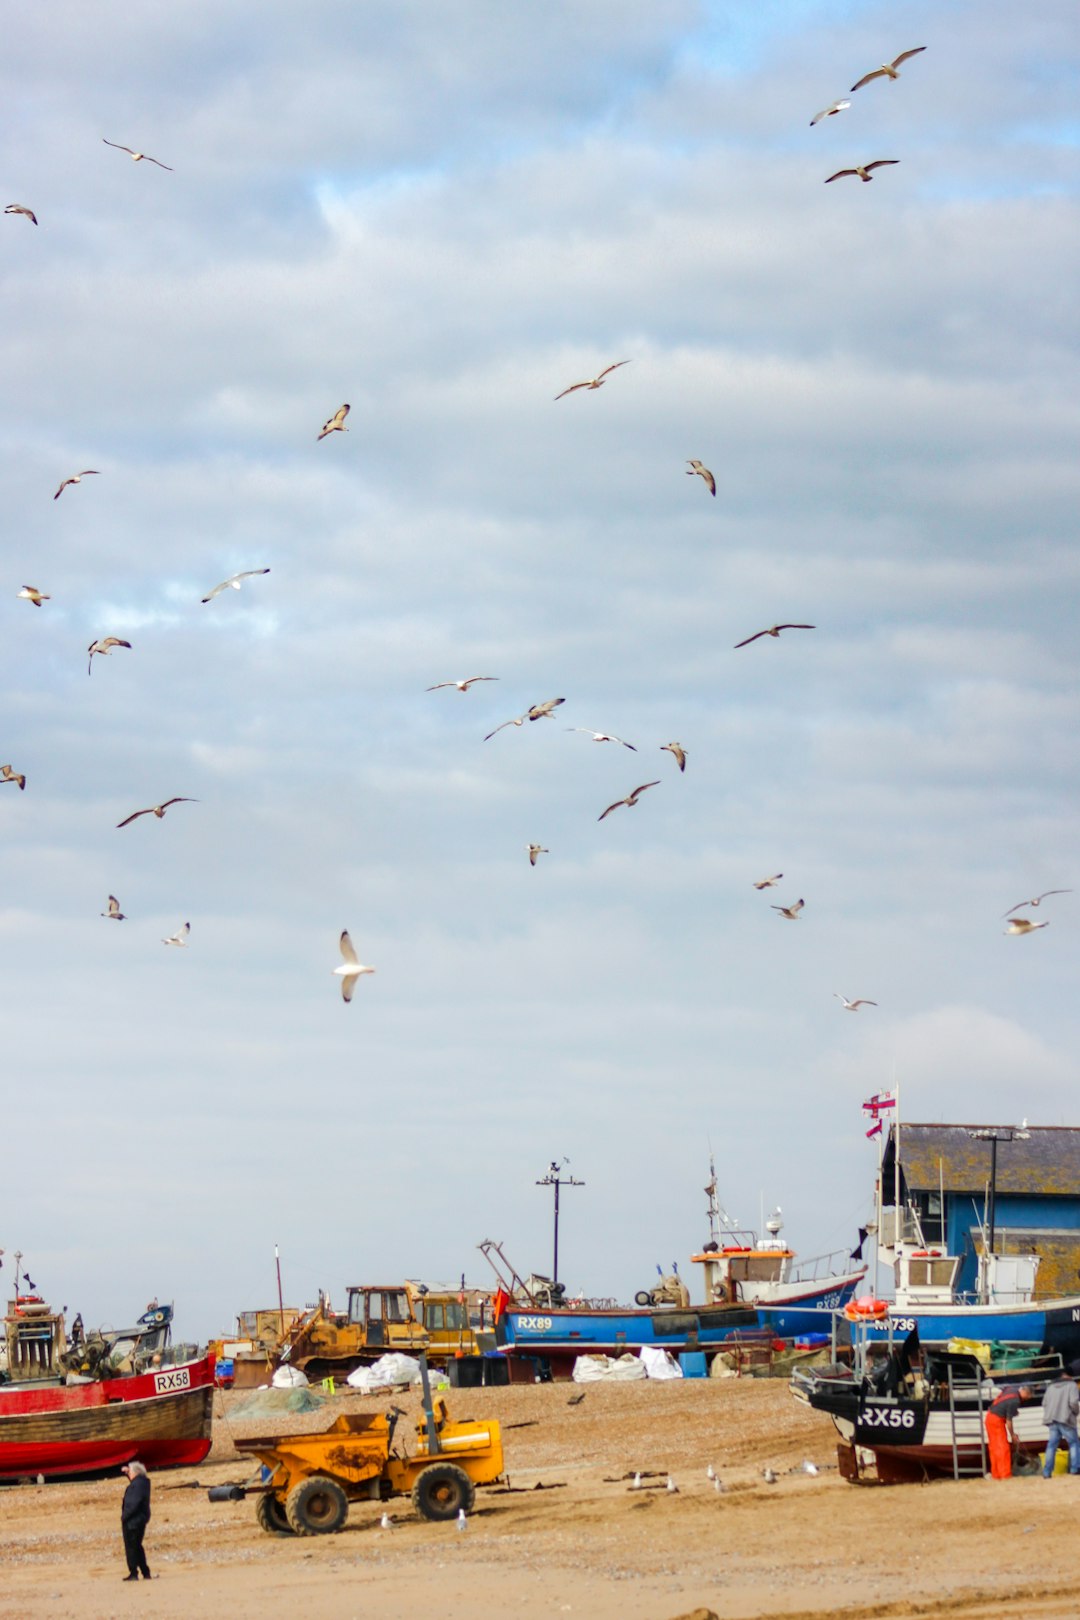 flock of birds flying over the sea during daytime